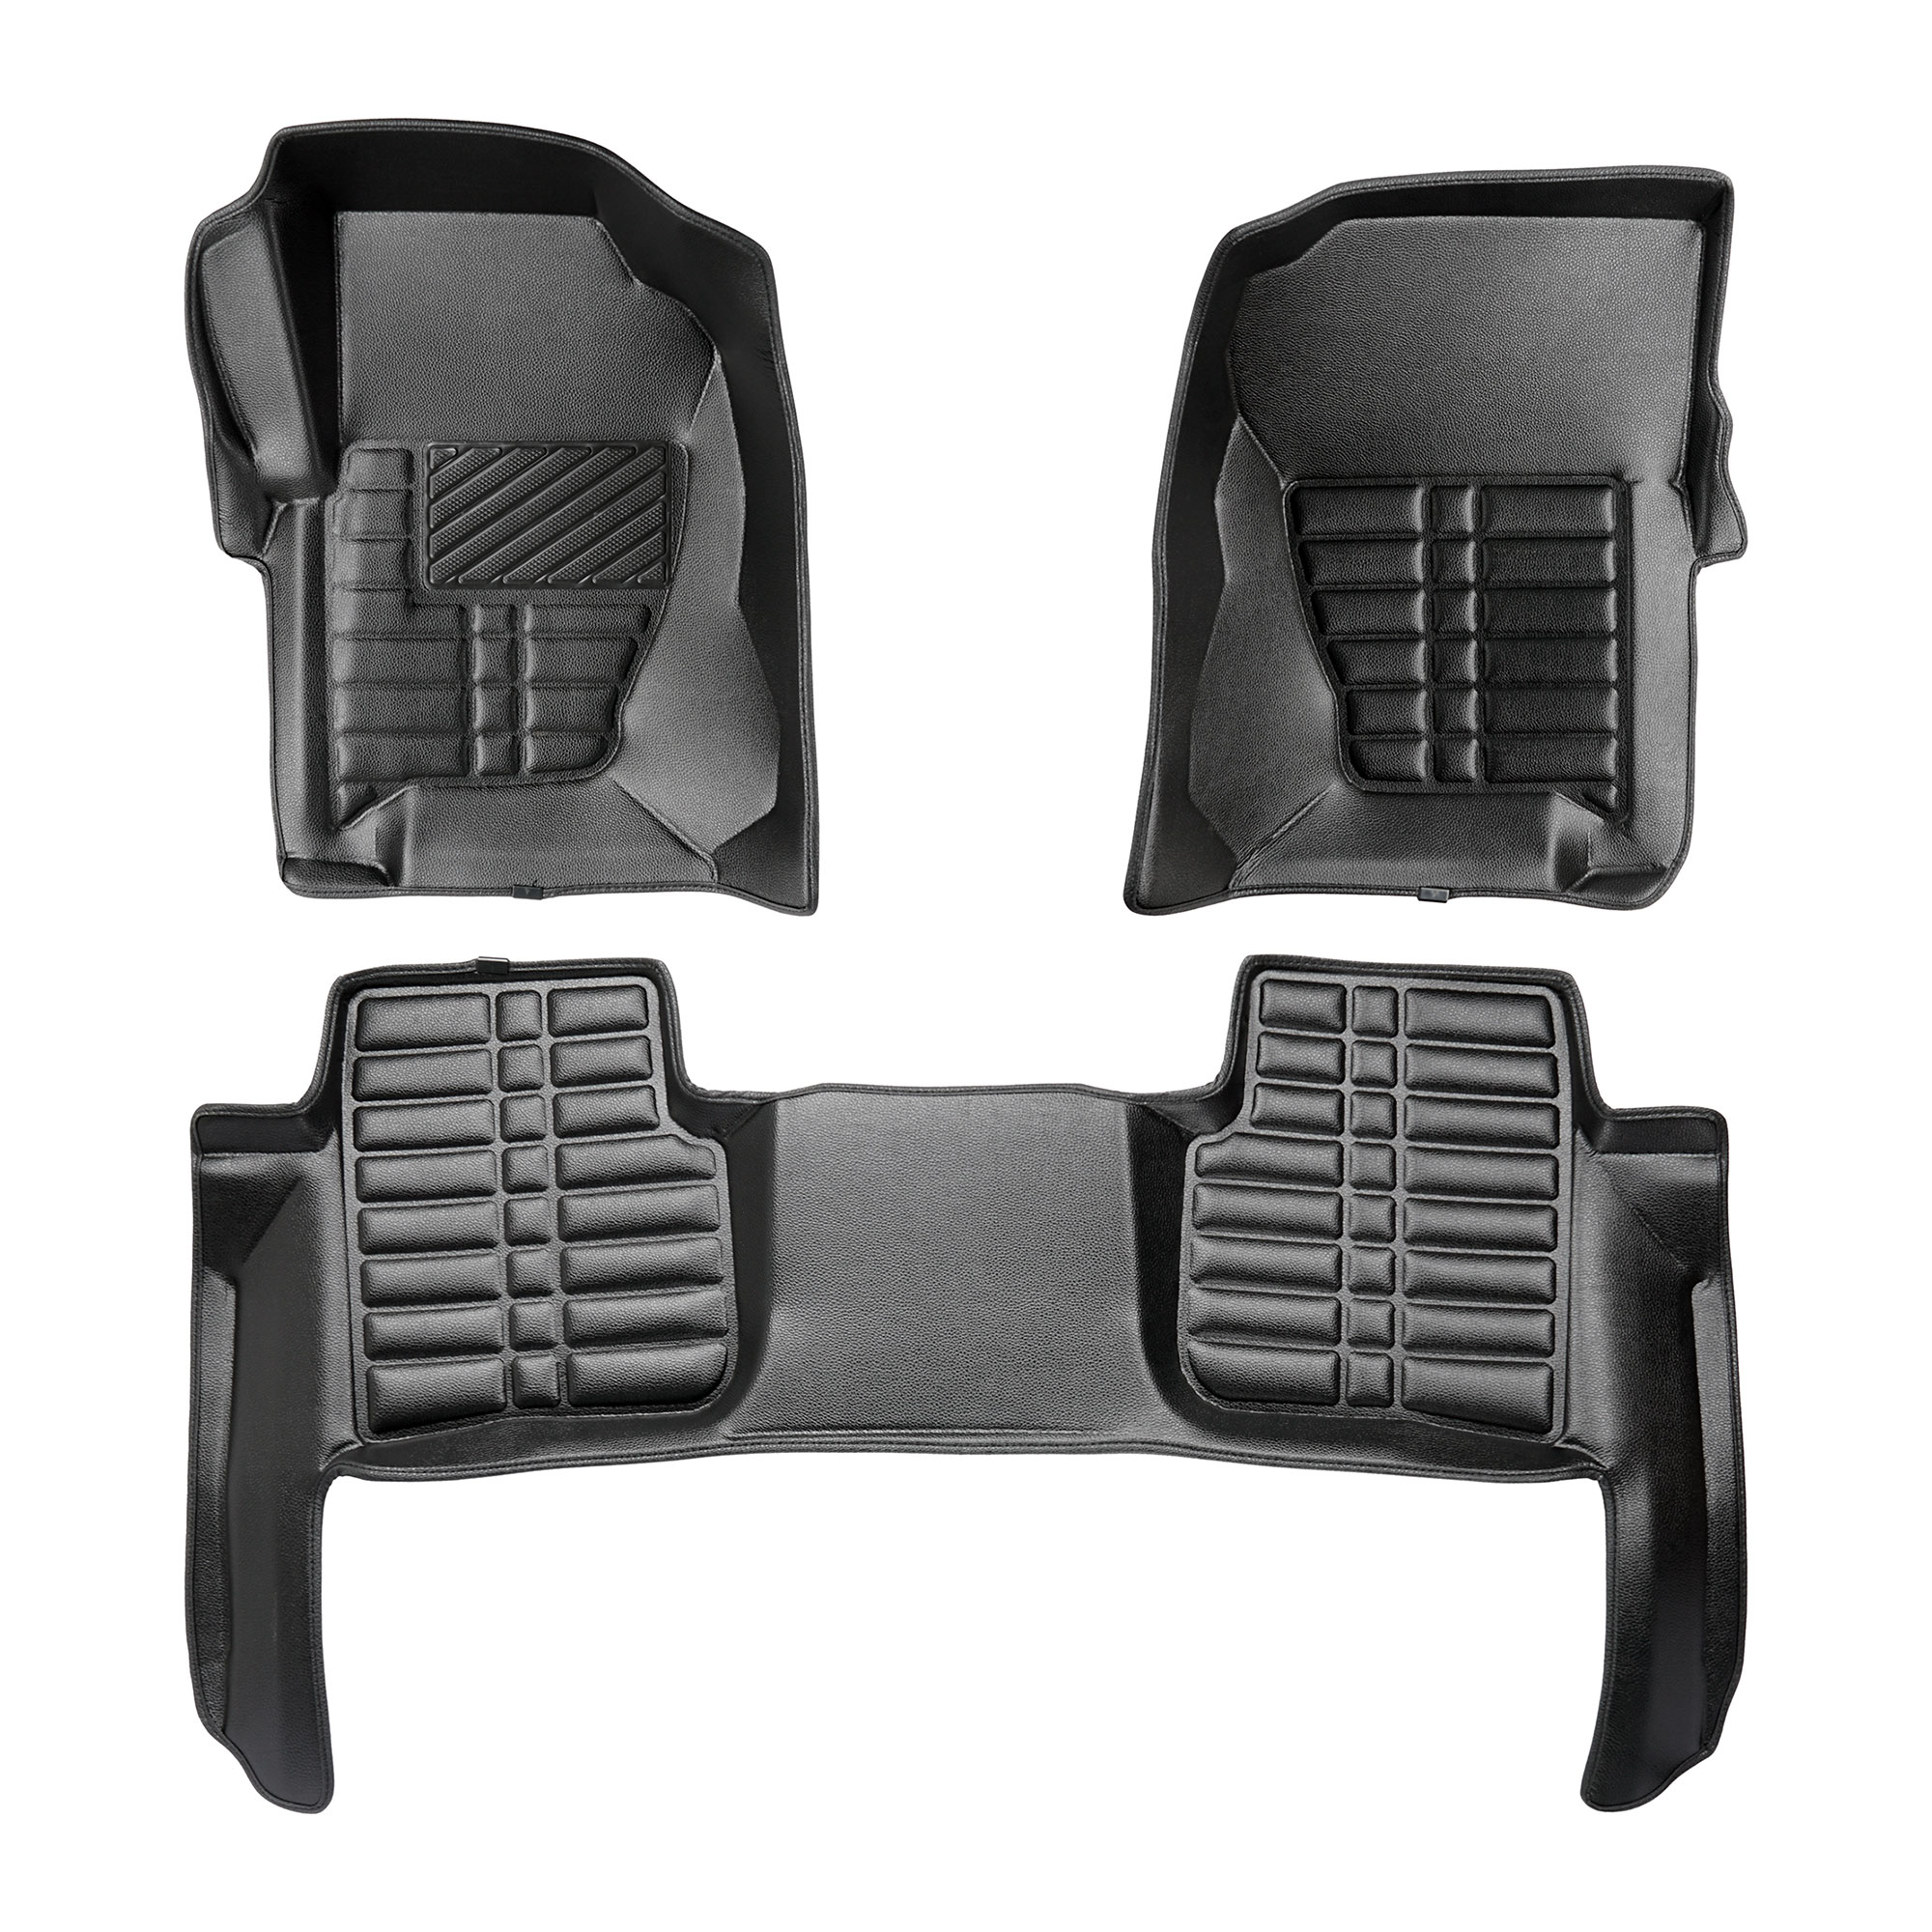 5D Premium Car Floor Mats TPE Set fits Land Rover Discovery 4 Year of  Construction 2009-2017